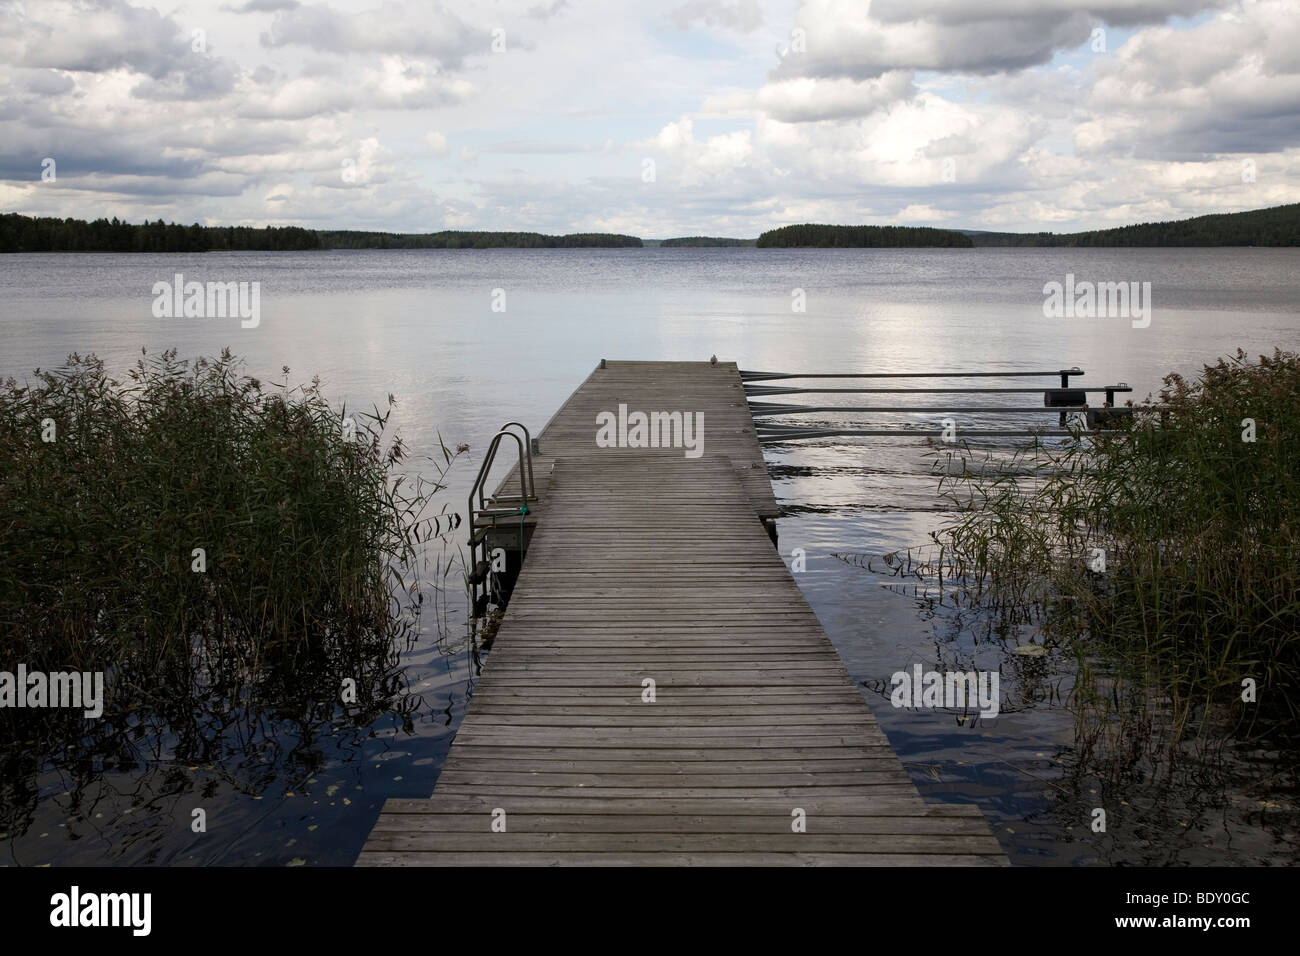 A wooden jetty on Lake Rautavasi close to the town of Vammala in the Tampere Region of Finland. Stock Photo